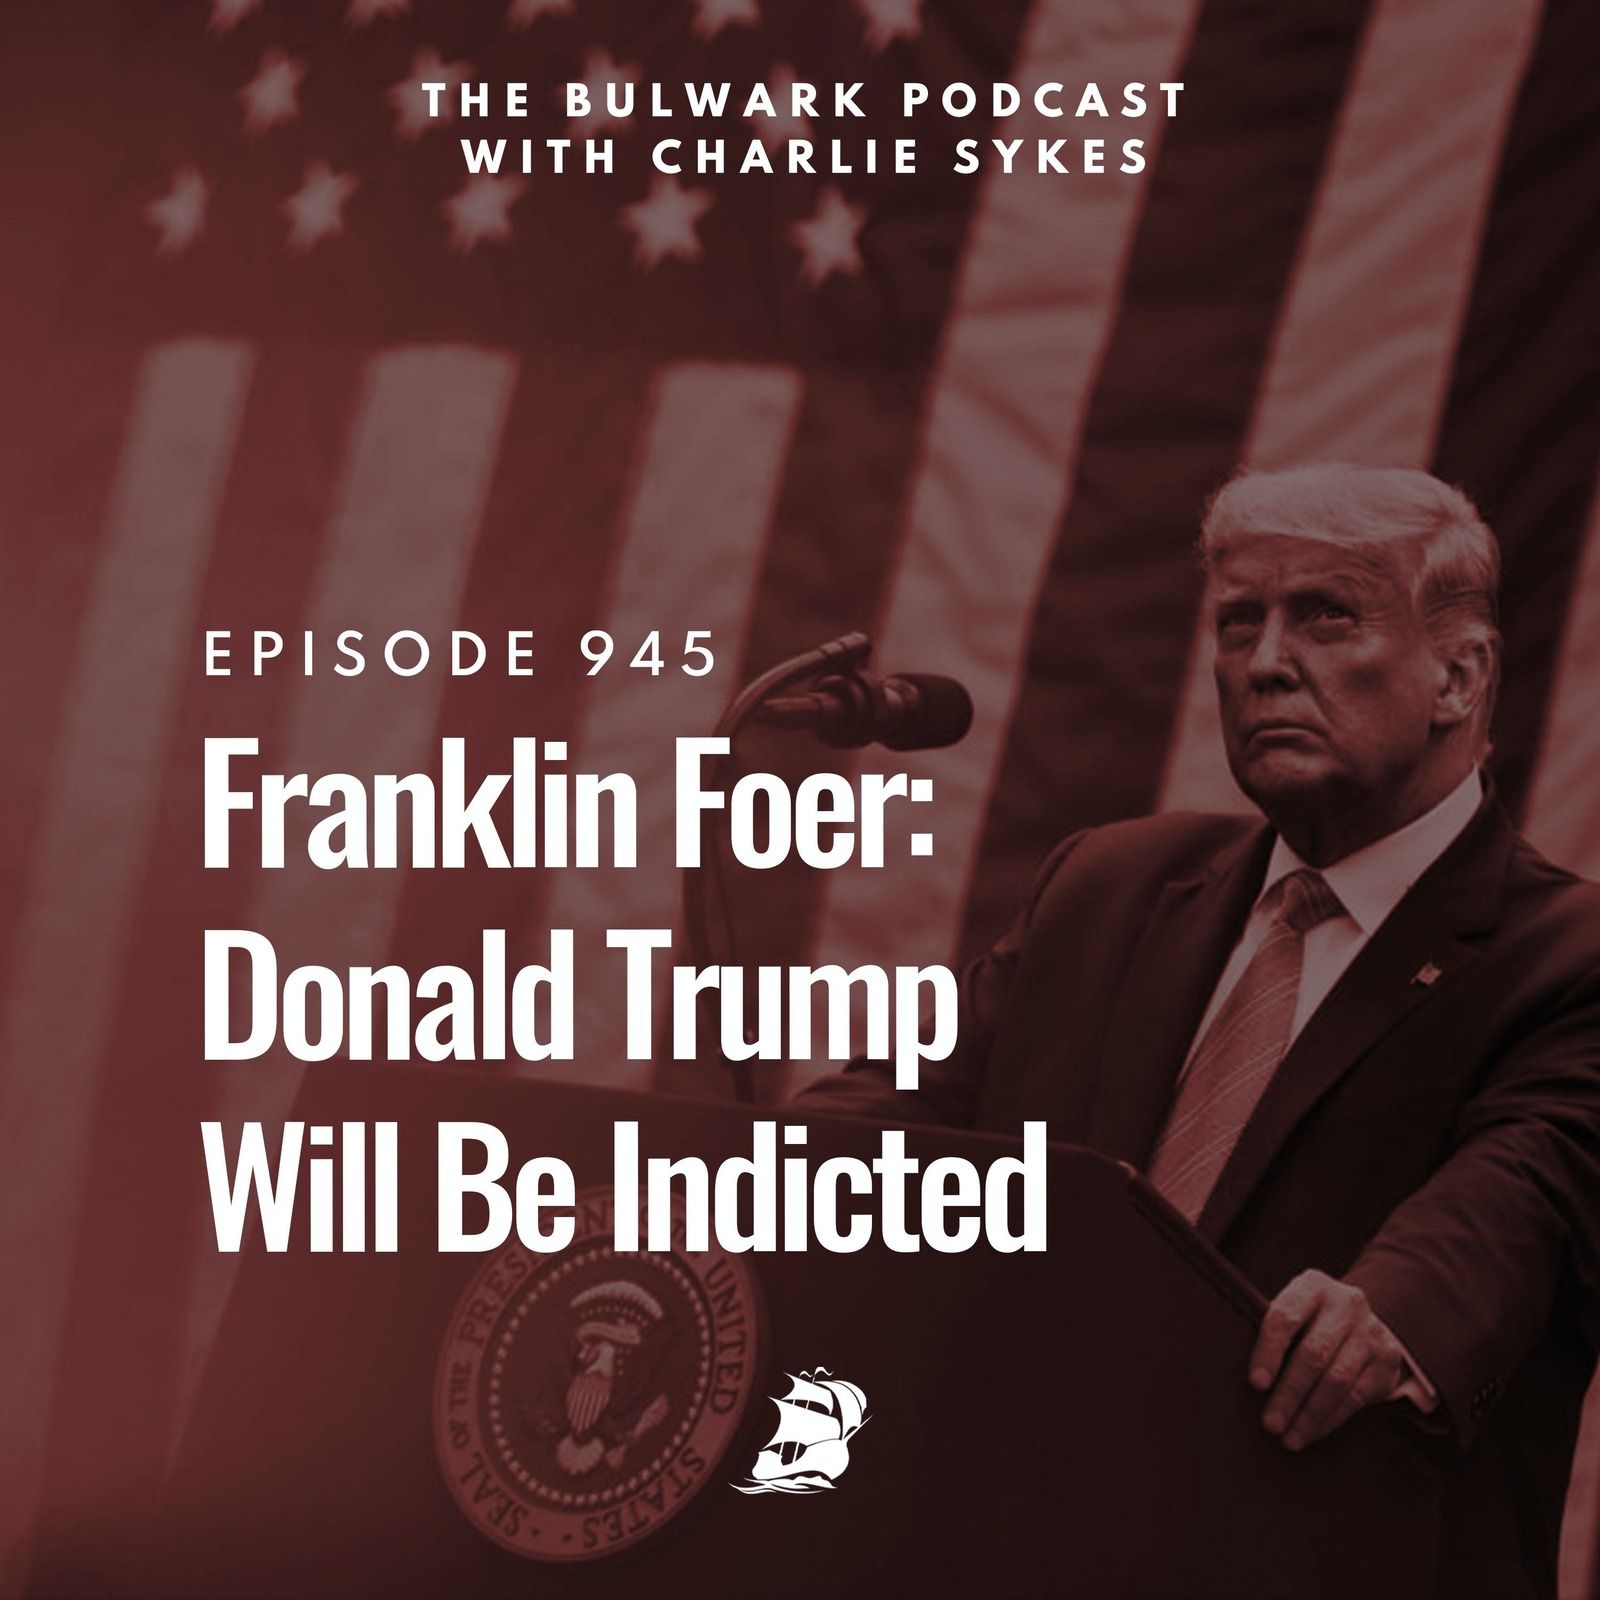 Franklin Foer: Donald Trump Will Be Indicted by The Bulwark Podcast